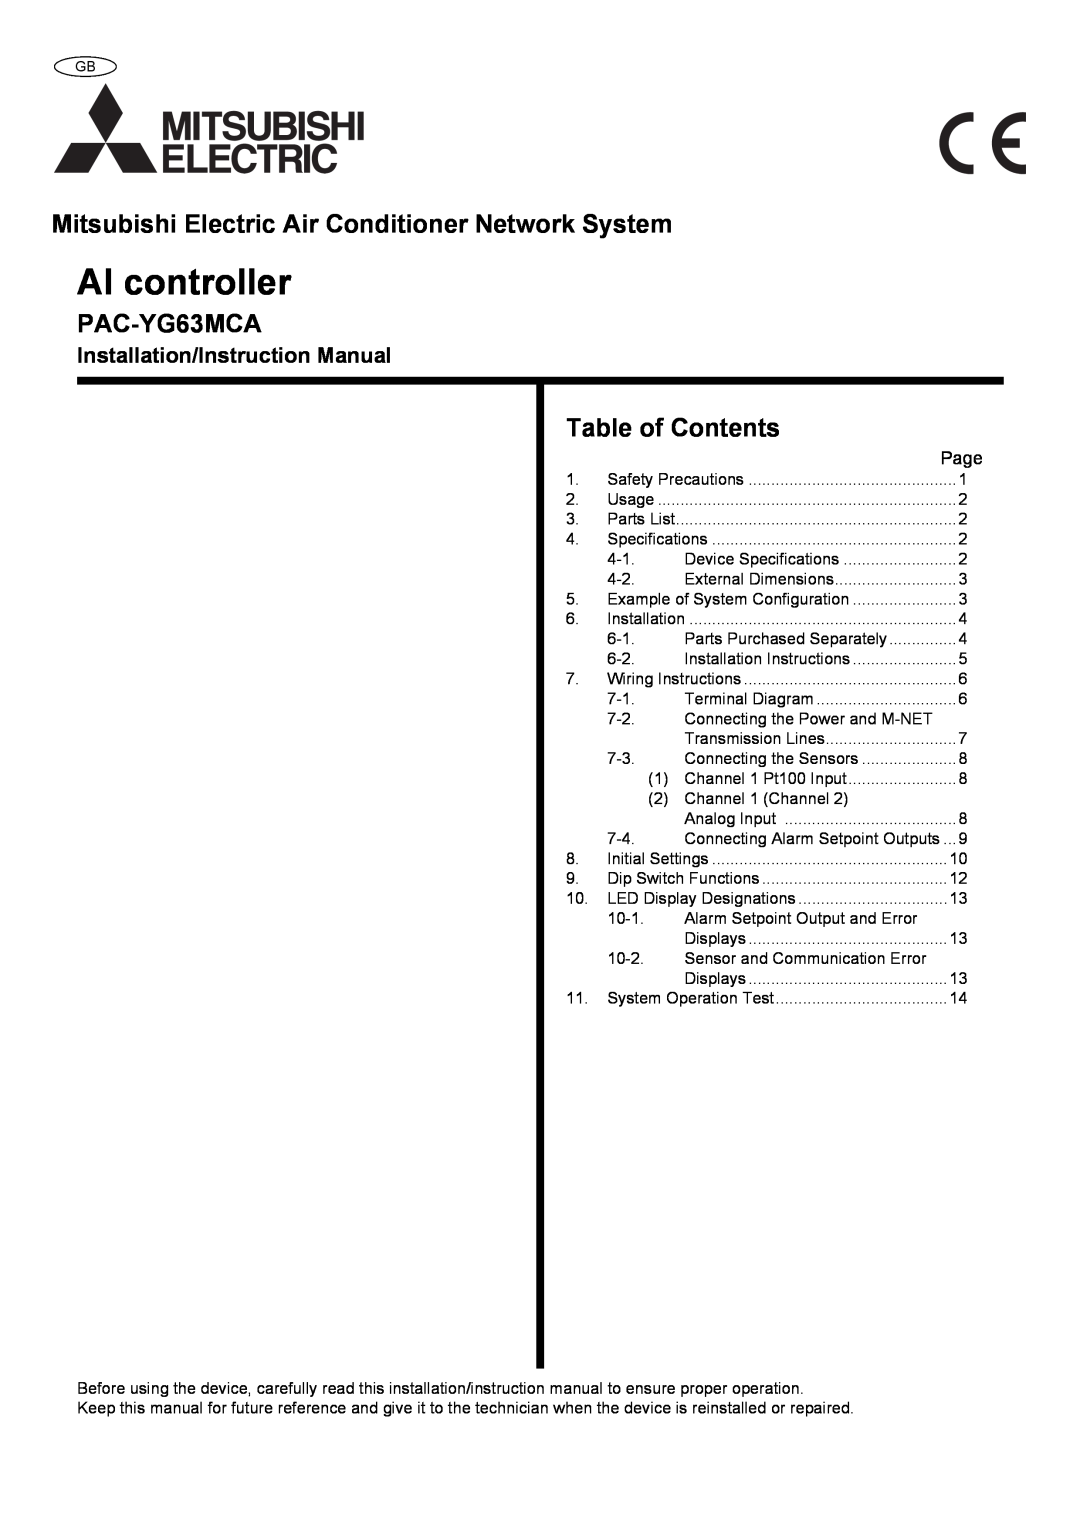 Mitsubishi Electronics PAC-YG63MCA instruction manual Installation/Instruction Manual, AI controller, Table of Contents 